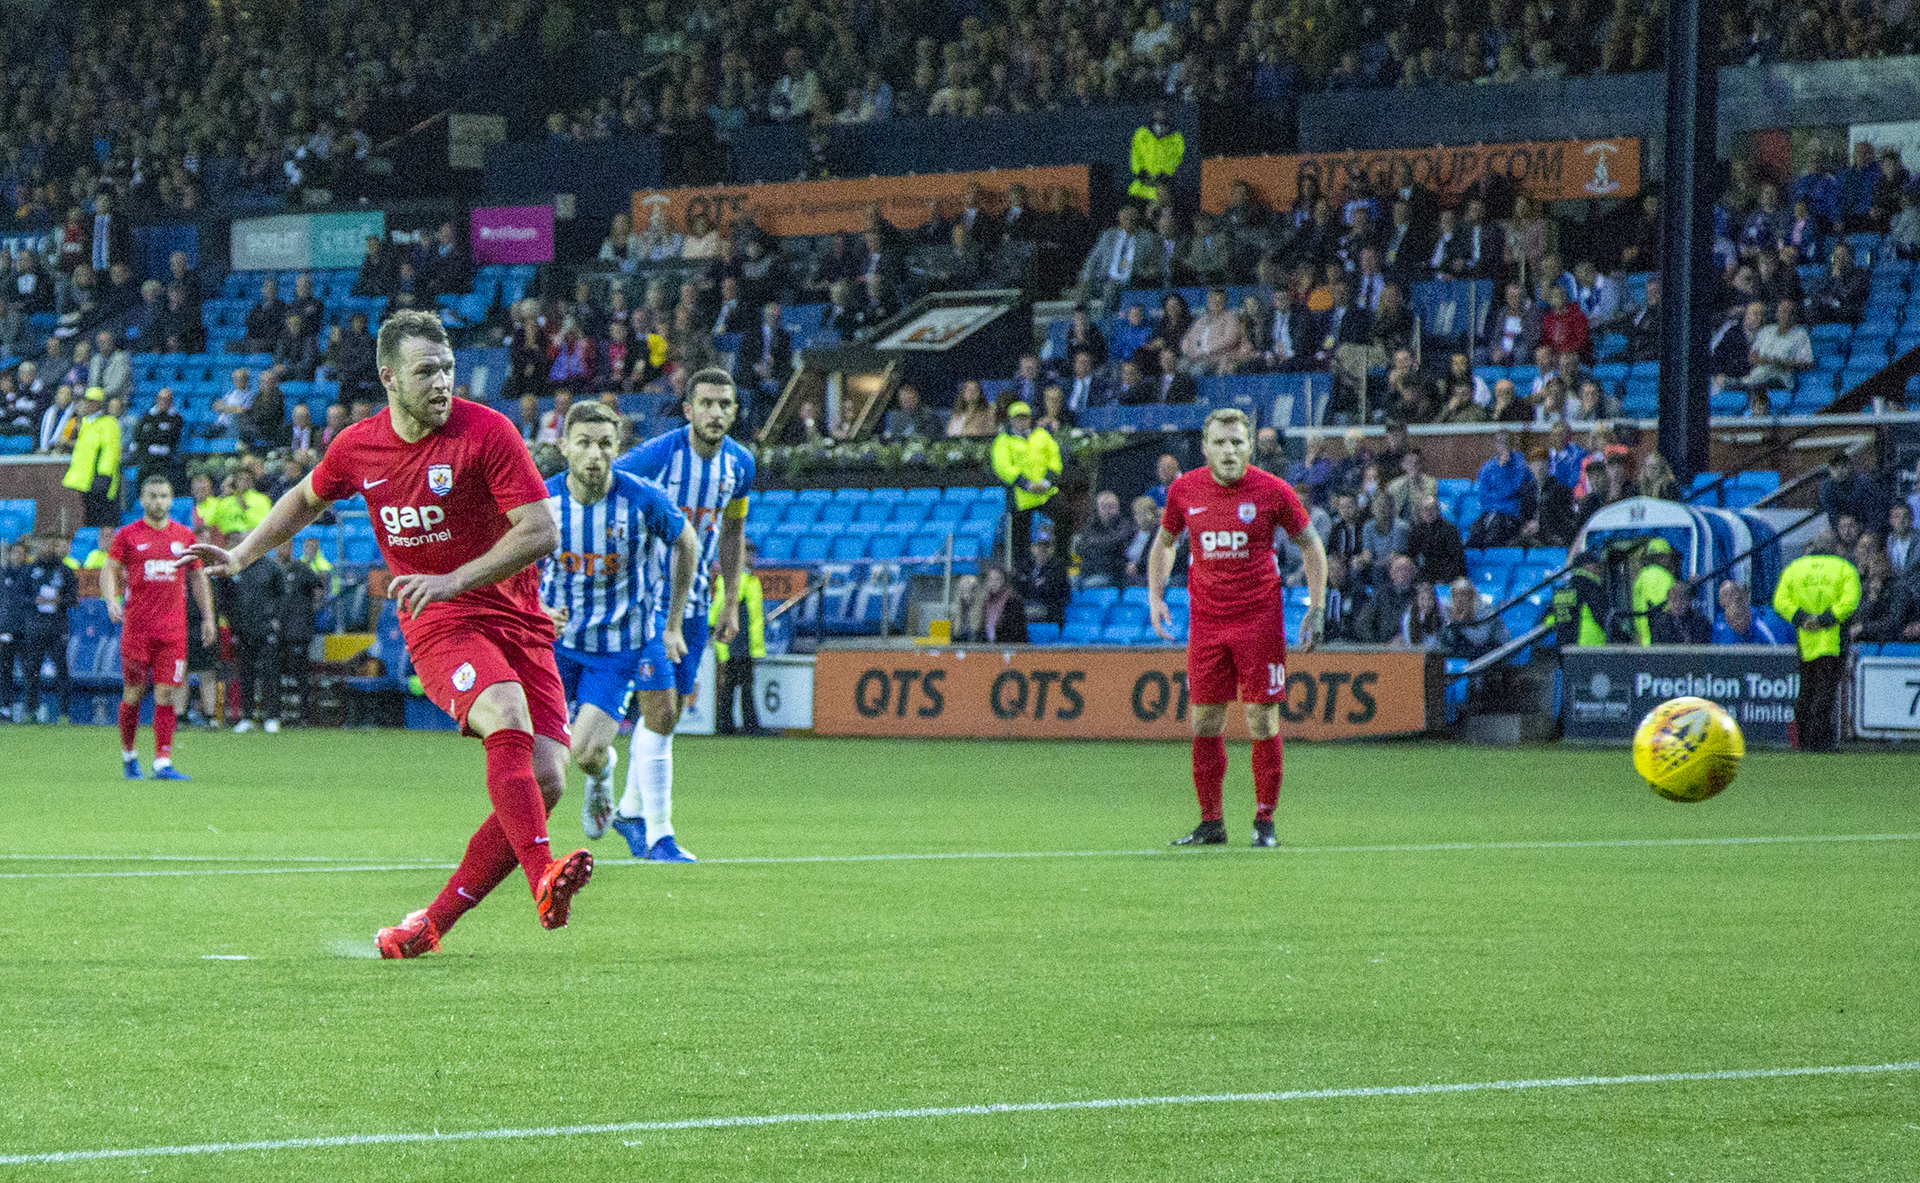 Callum Morris converts from the spot to send The Nomads 2-0 up | © NCM Media